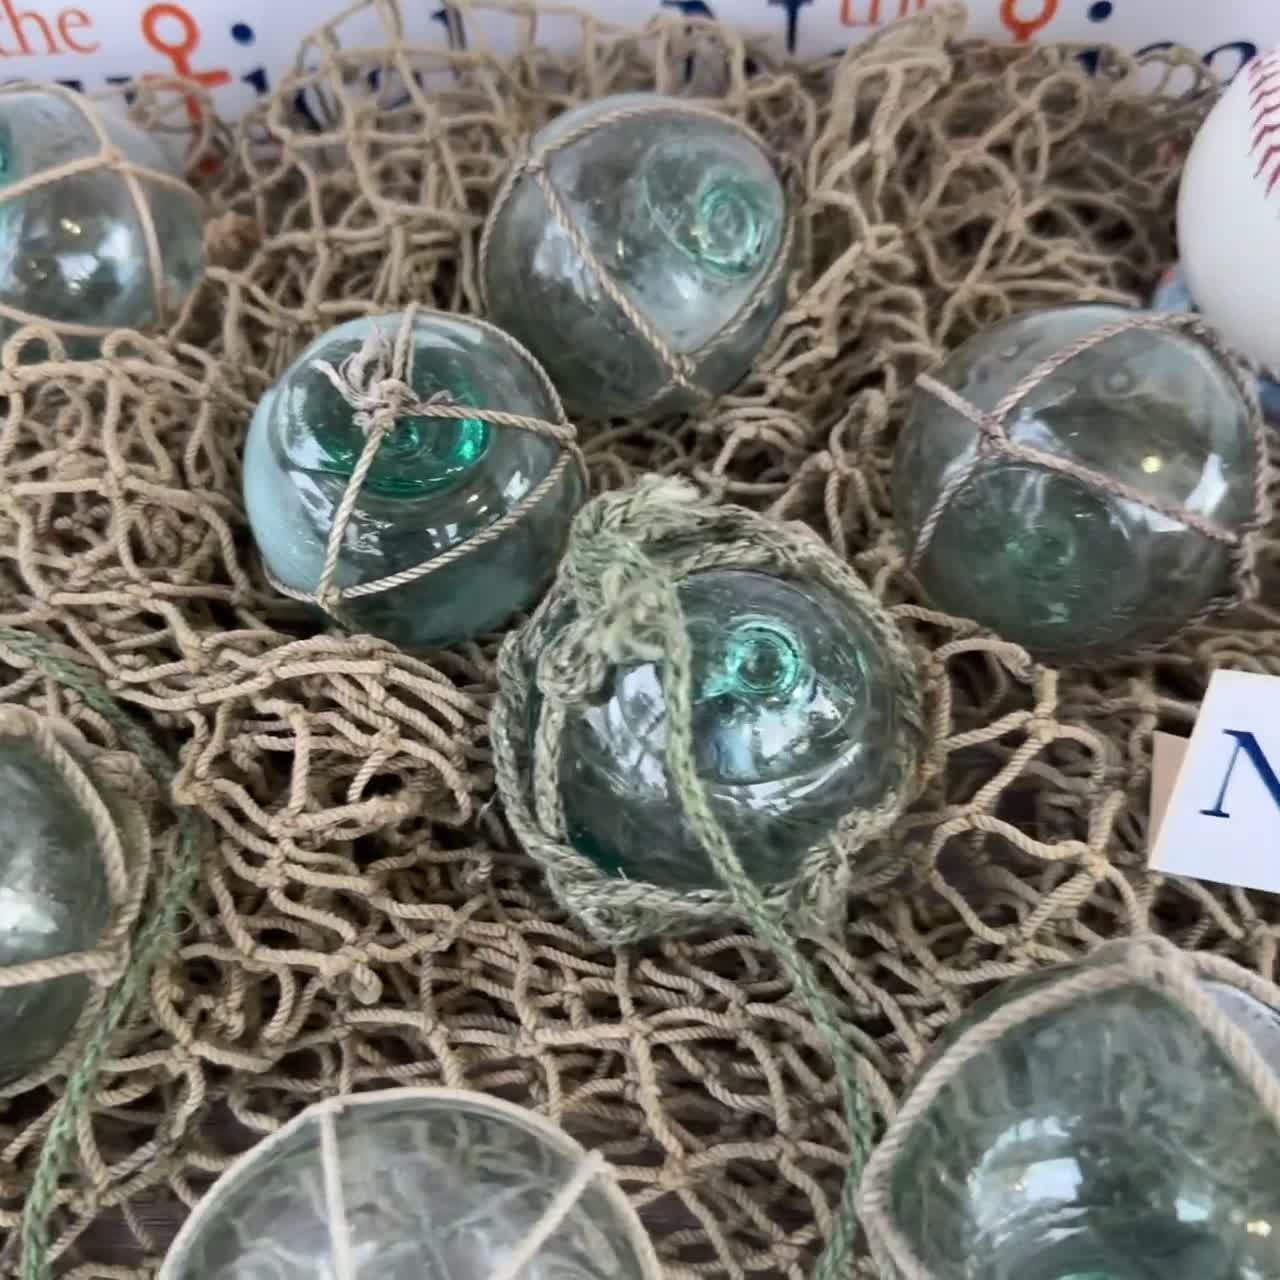 2.5 Japanese Glass Floats W/ Netting, Vintage Fishing Buoys From